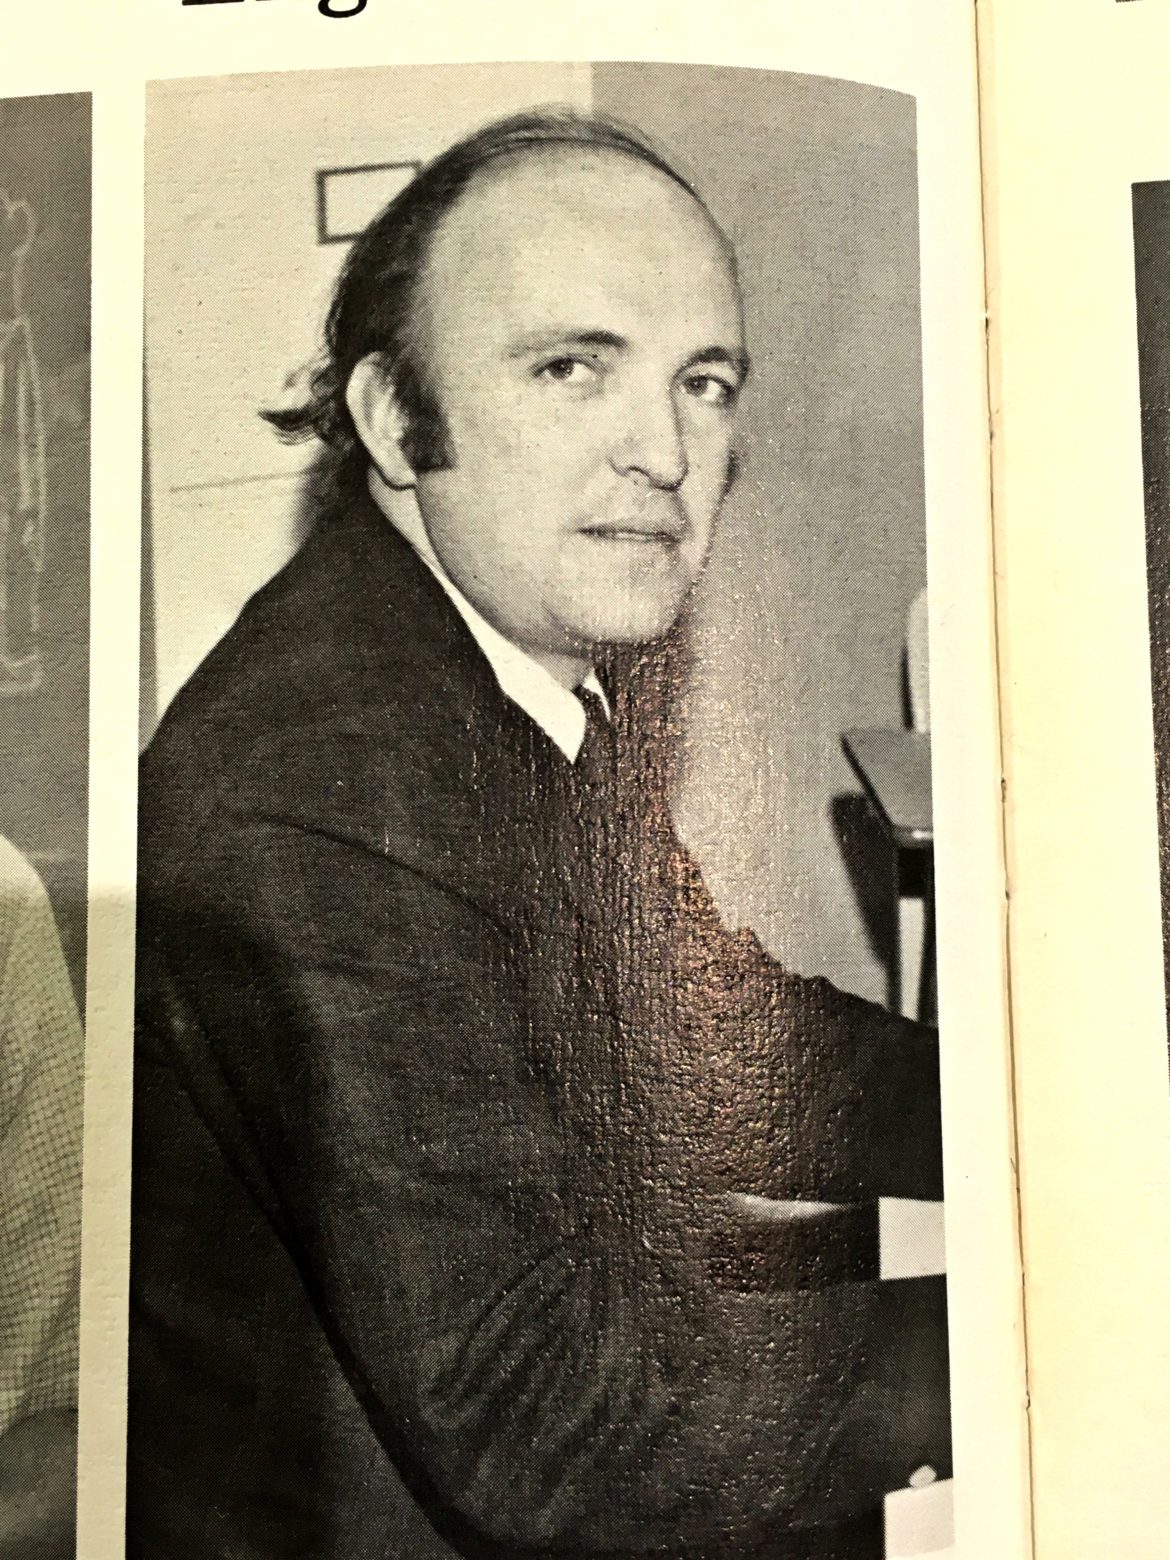 Mr. Dwight Wall in the 1974 Greenwich High School Yearbook 